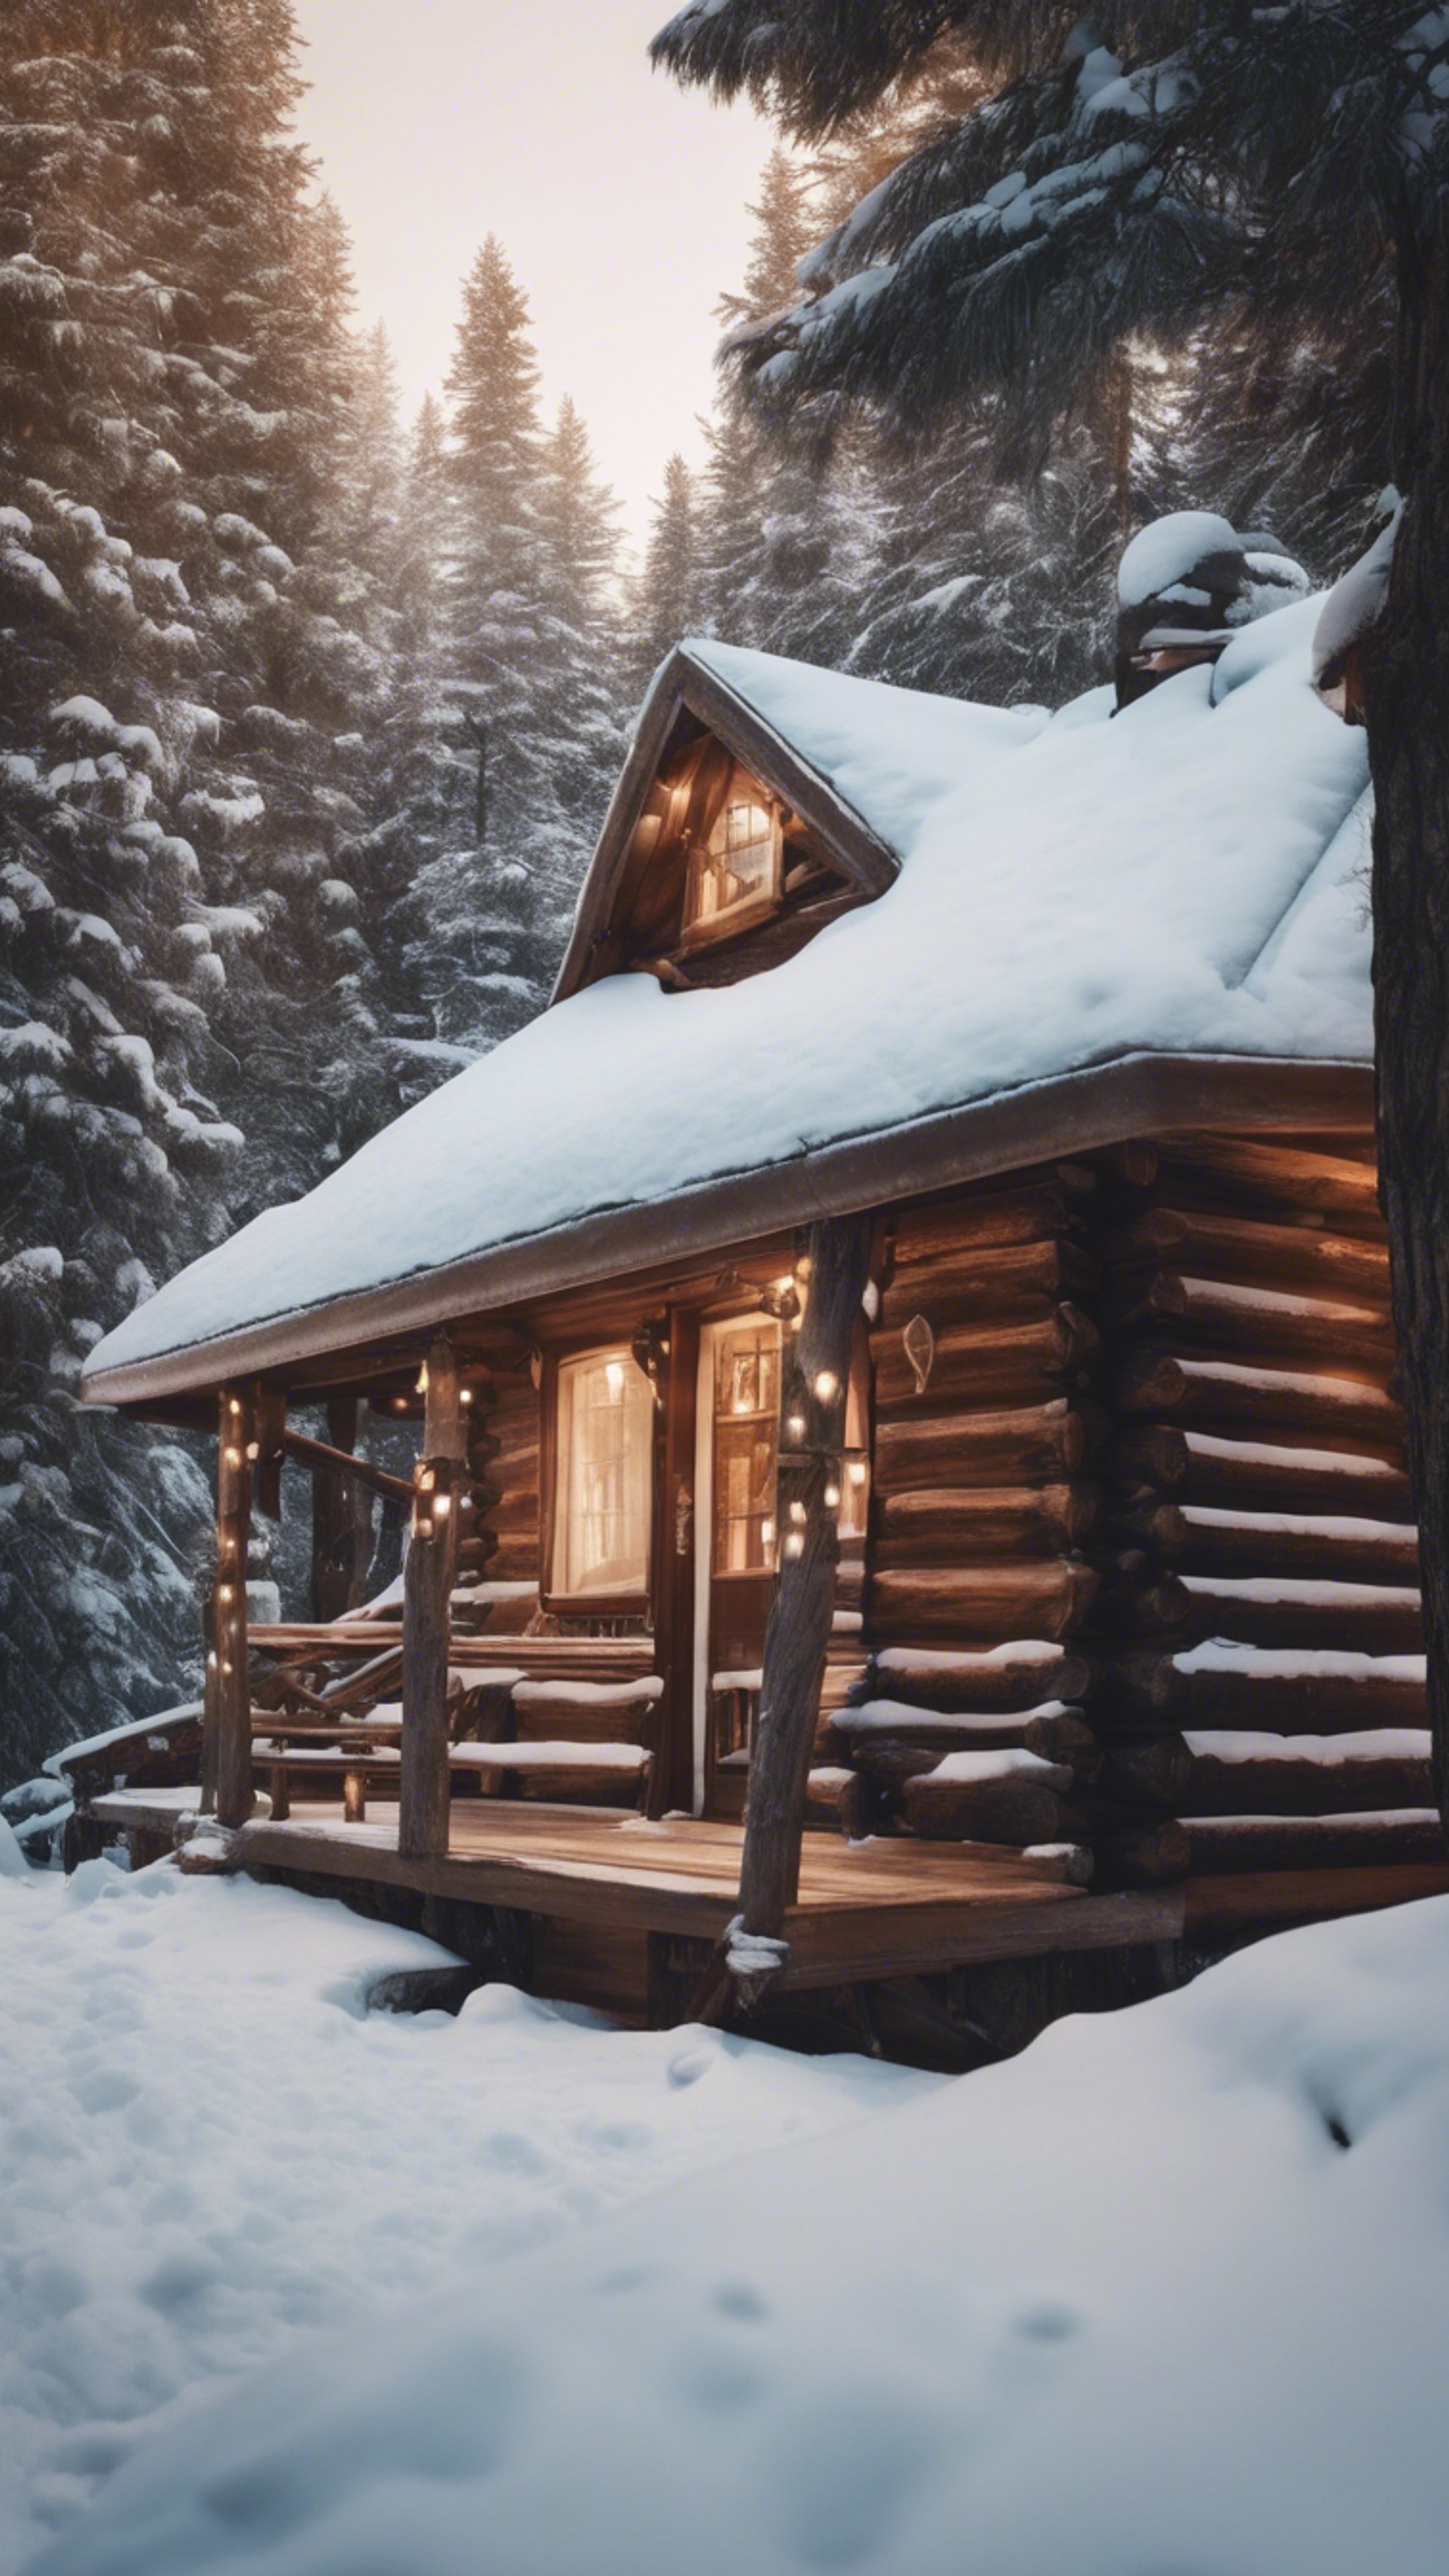 A quaint log cabin with inviting lights shining out of its small windows, surrounded by snow-laden trees. Wallpaper[bbc1e62608b04a1c8176]